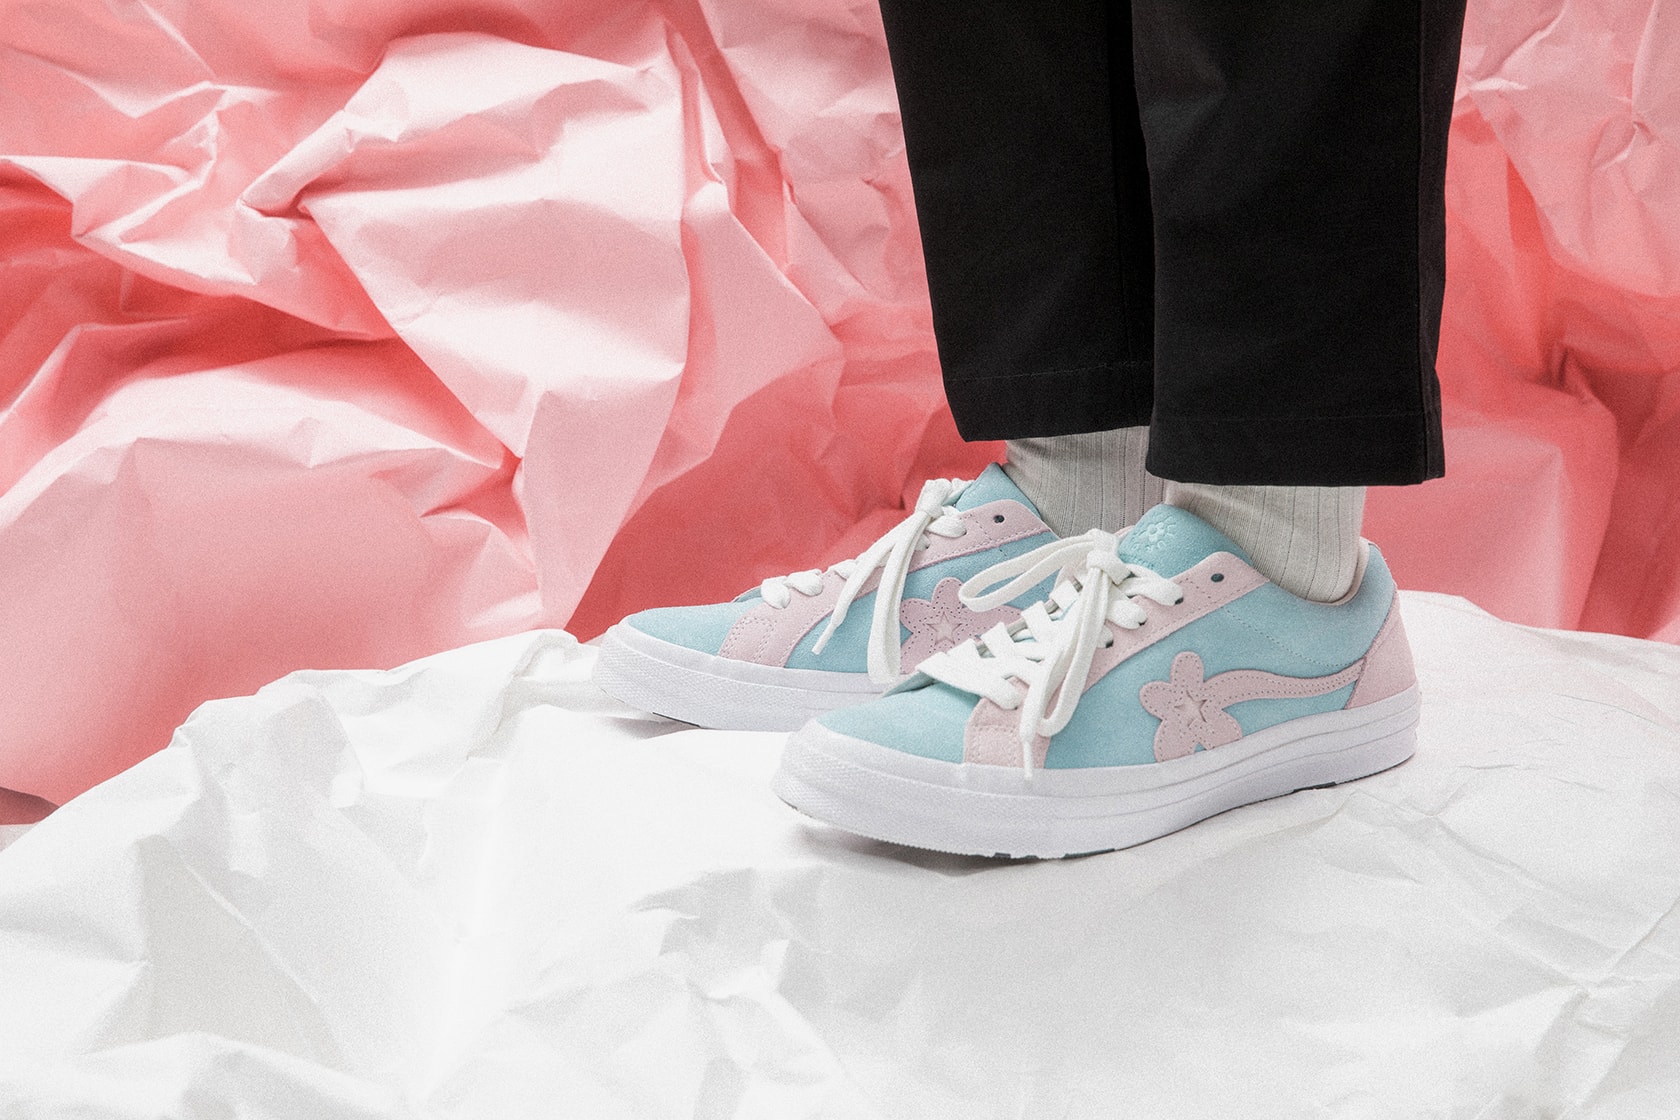 GOLF le FLEUR* x Converse Two Tone Closer Look Tyler, The Creator Pink Blue Orange Pastel Summer Release Information Details Closer Look Raffle HBX Available Now